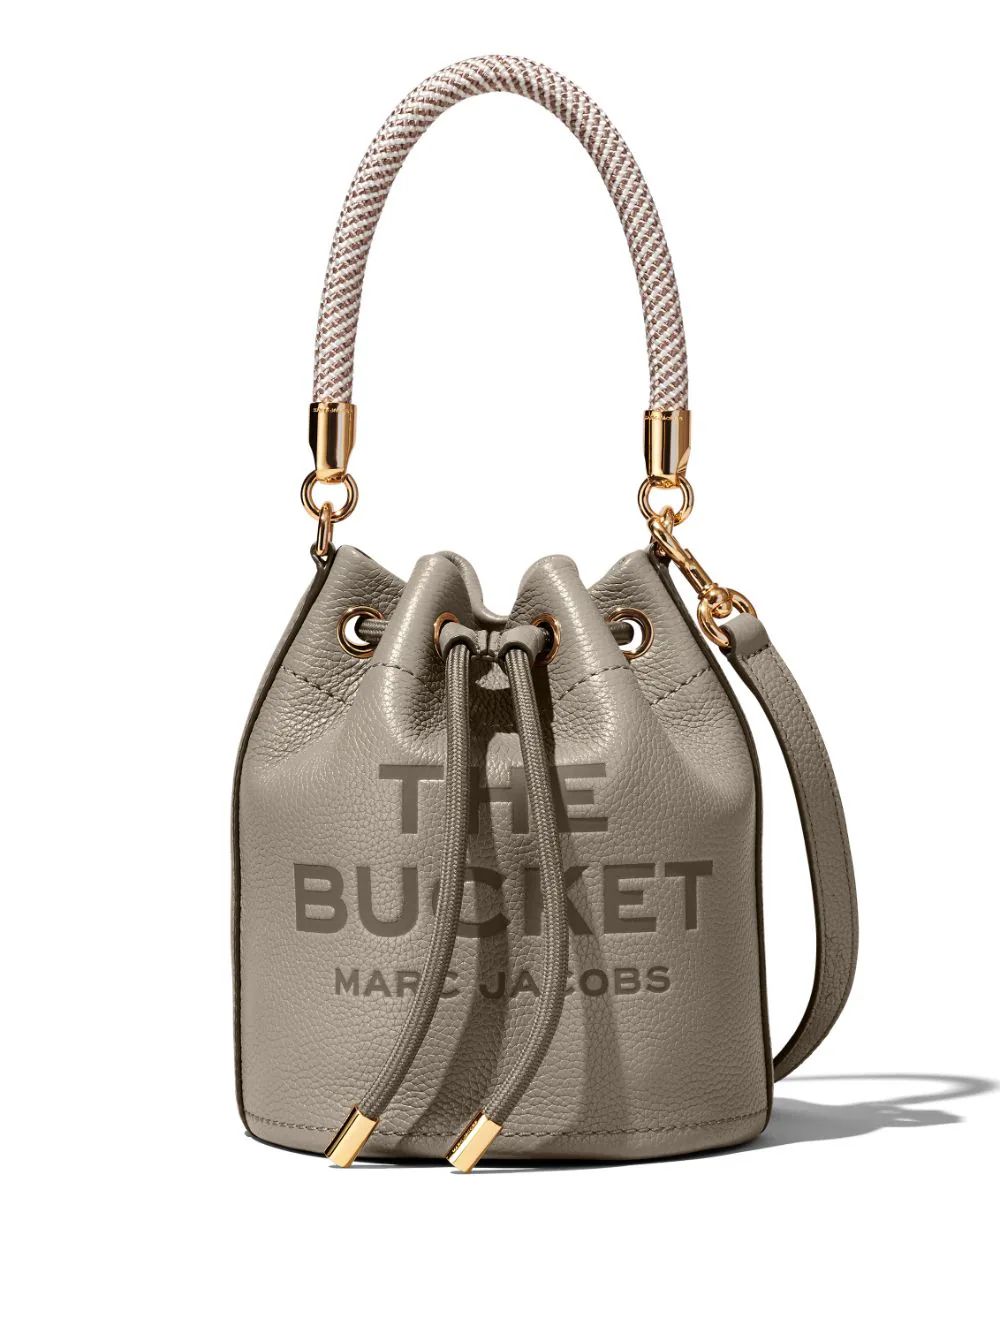 The DetailsNew SeasonMarc JacobsThe Bucket bagbrown calf leather grained texture debossed logo to... | Farfetch Global